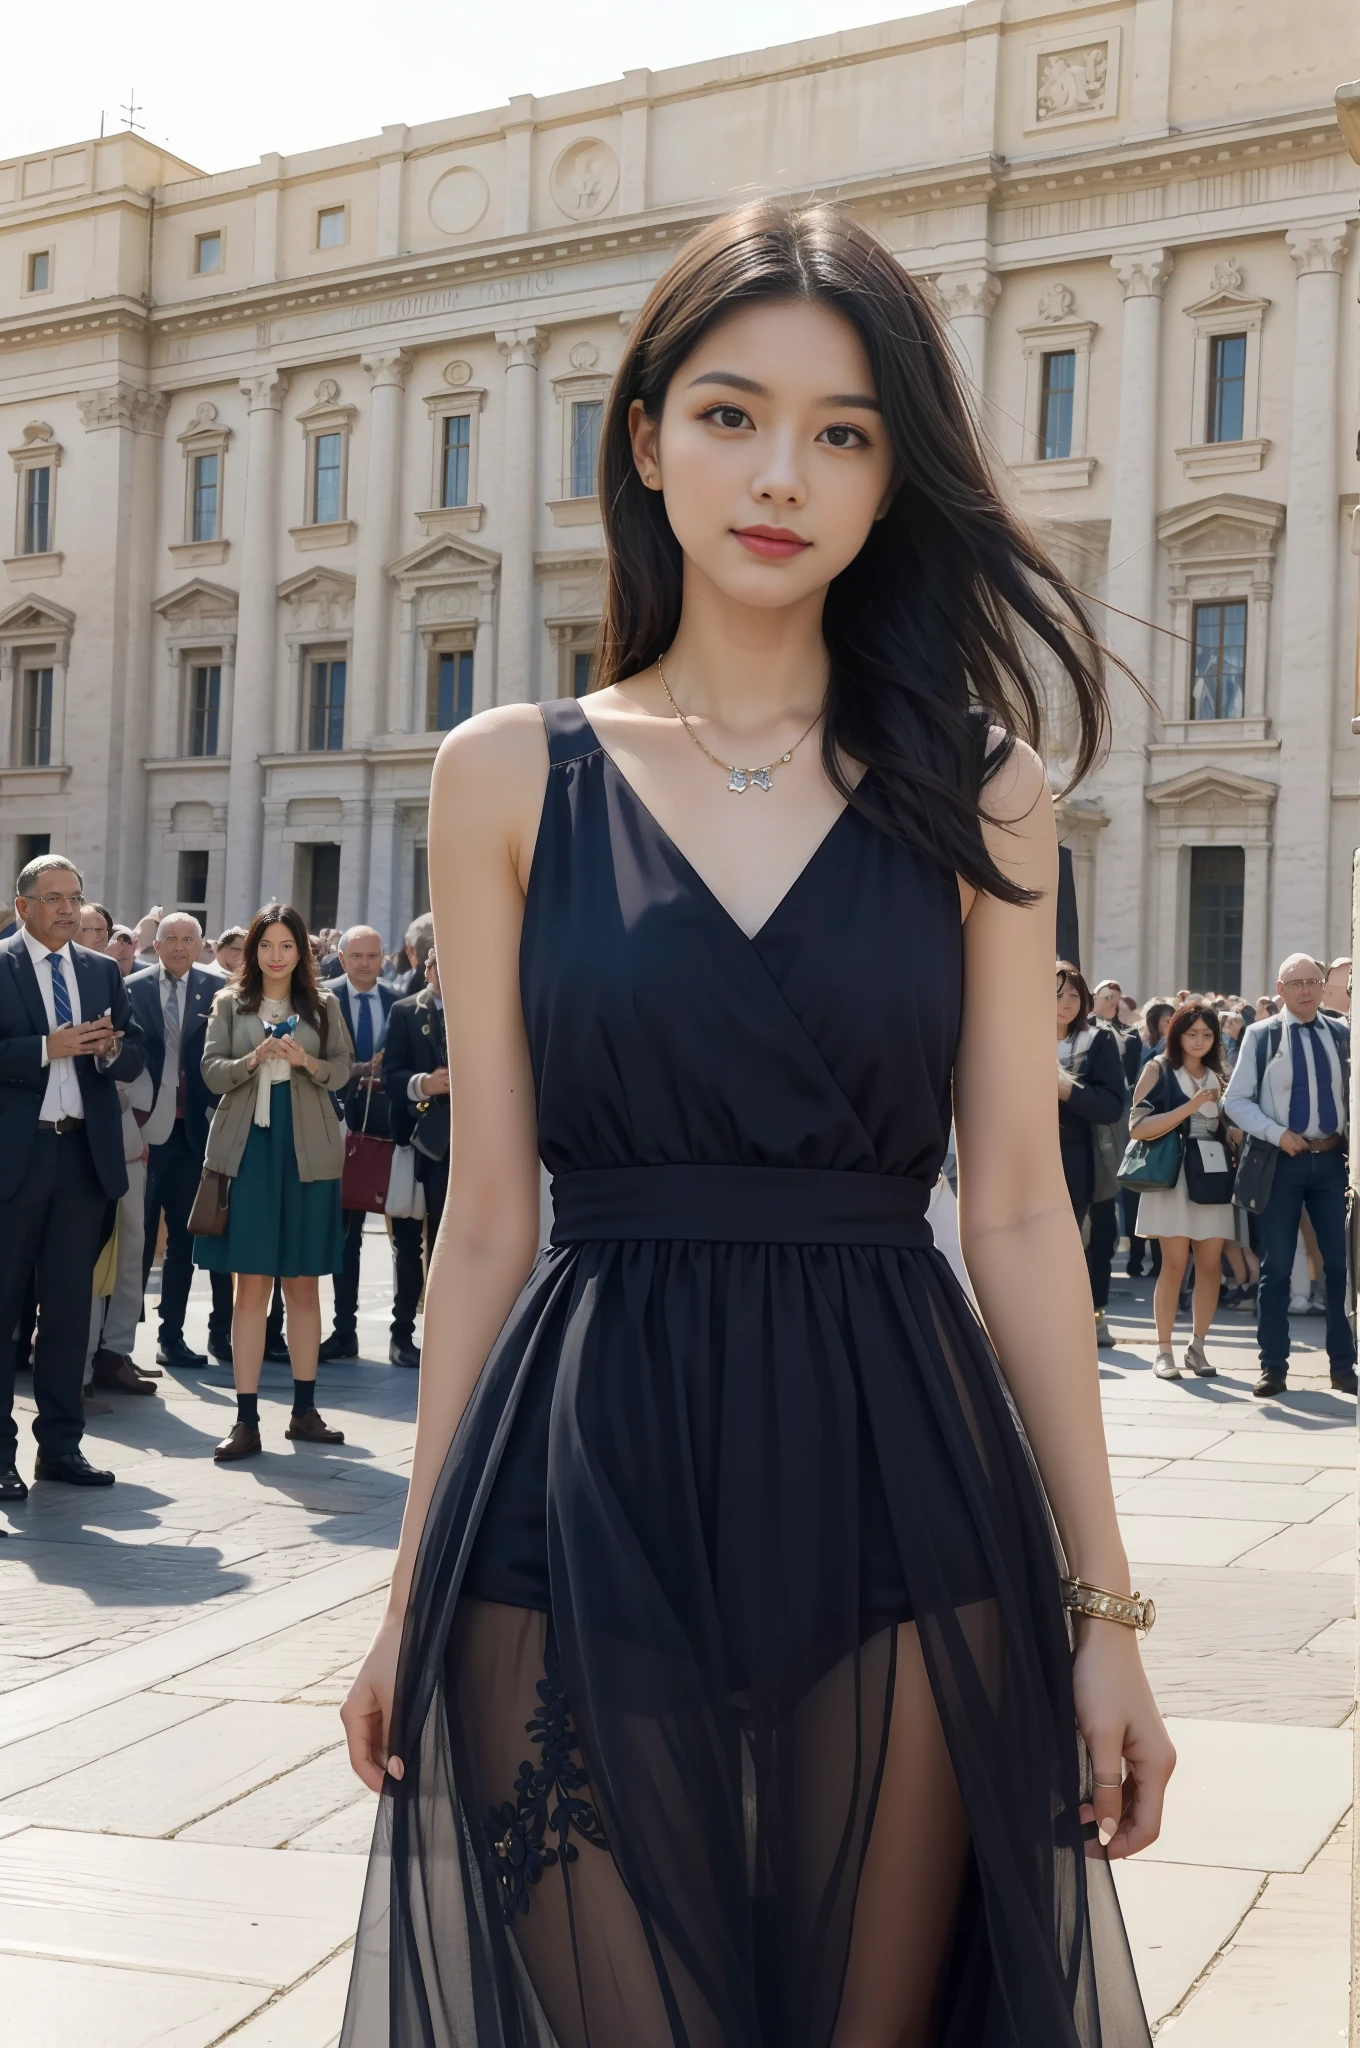 masterpiece, 4K, best quality, FELute, necklace,gorgeous dress, (on the St. Peter's Square of Vatican,crowd),bracers, cowboy shot, looking at viewer, smirk, hand up